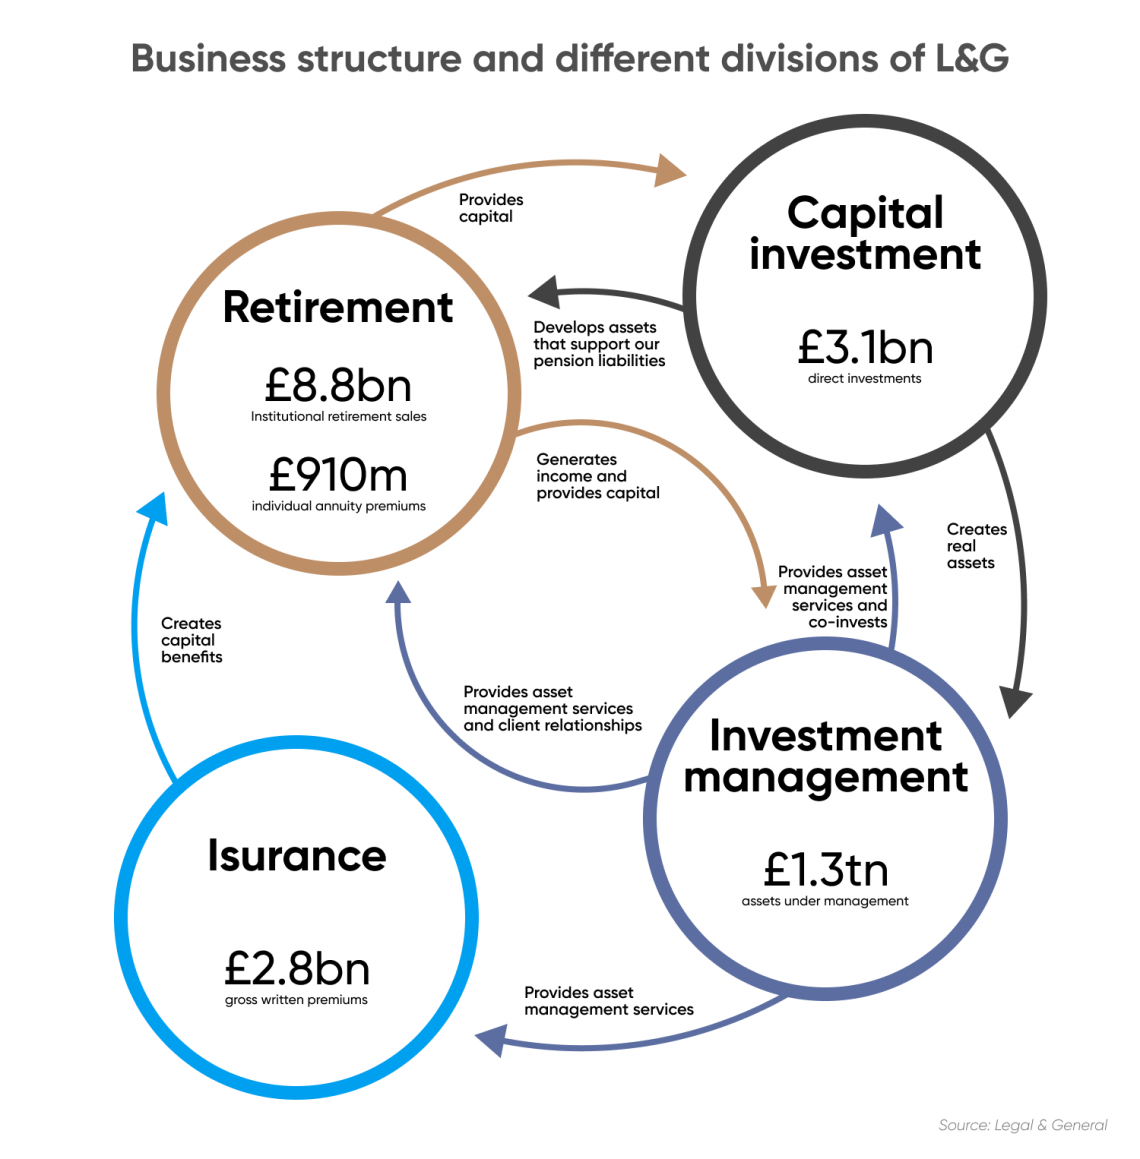     Business Structure and Various Divisions of L&G